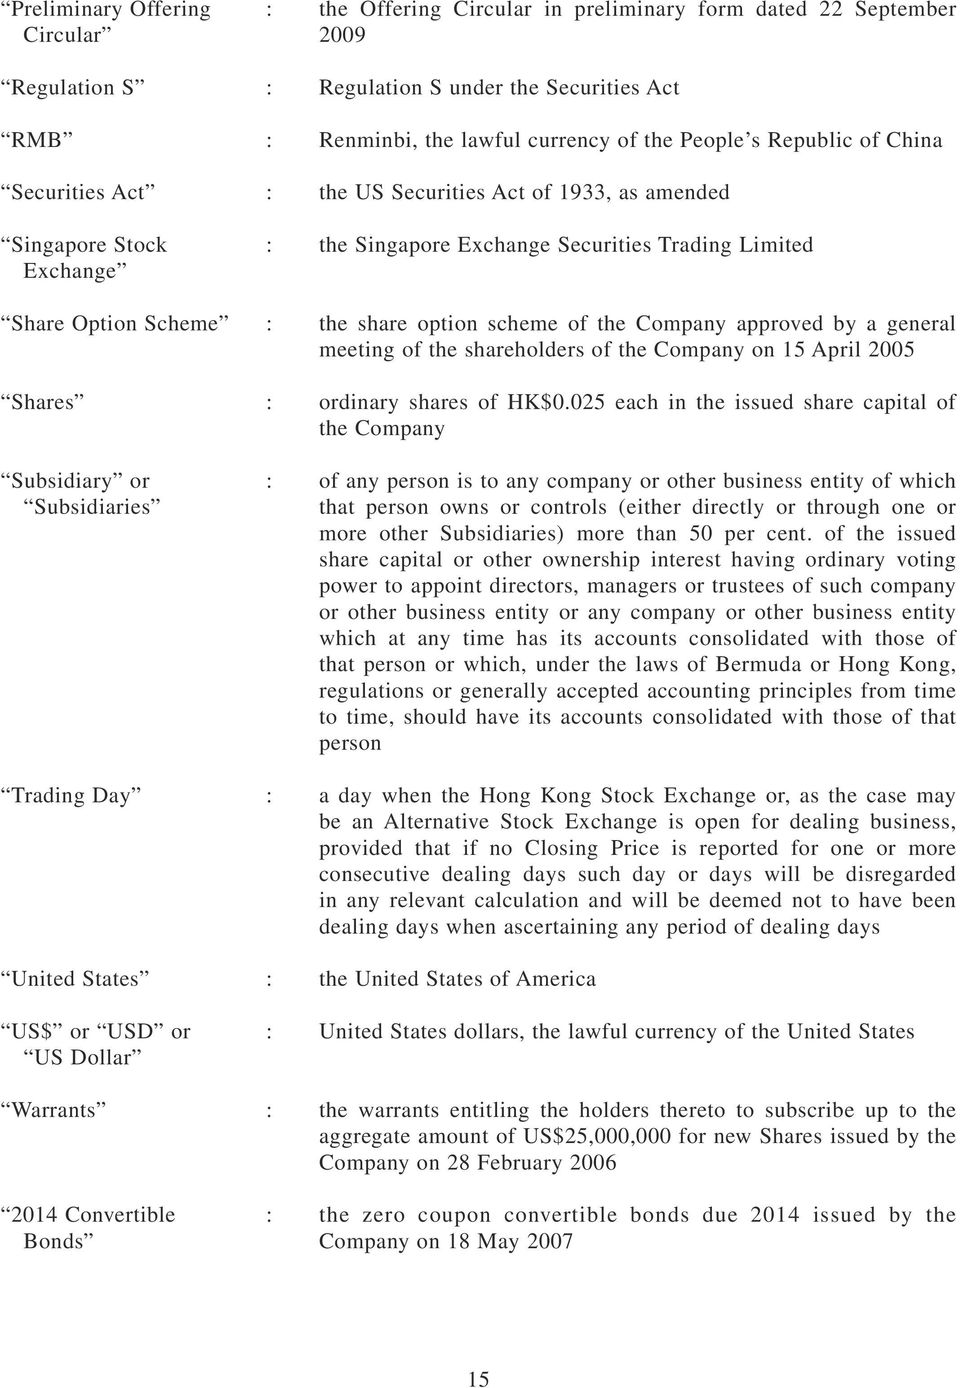 option scheme of the Company approved by a general meeting of the shareholders of the Company on 15 April 2005 Shares : ordinary shares of HK$0.